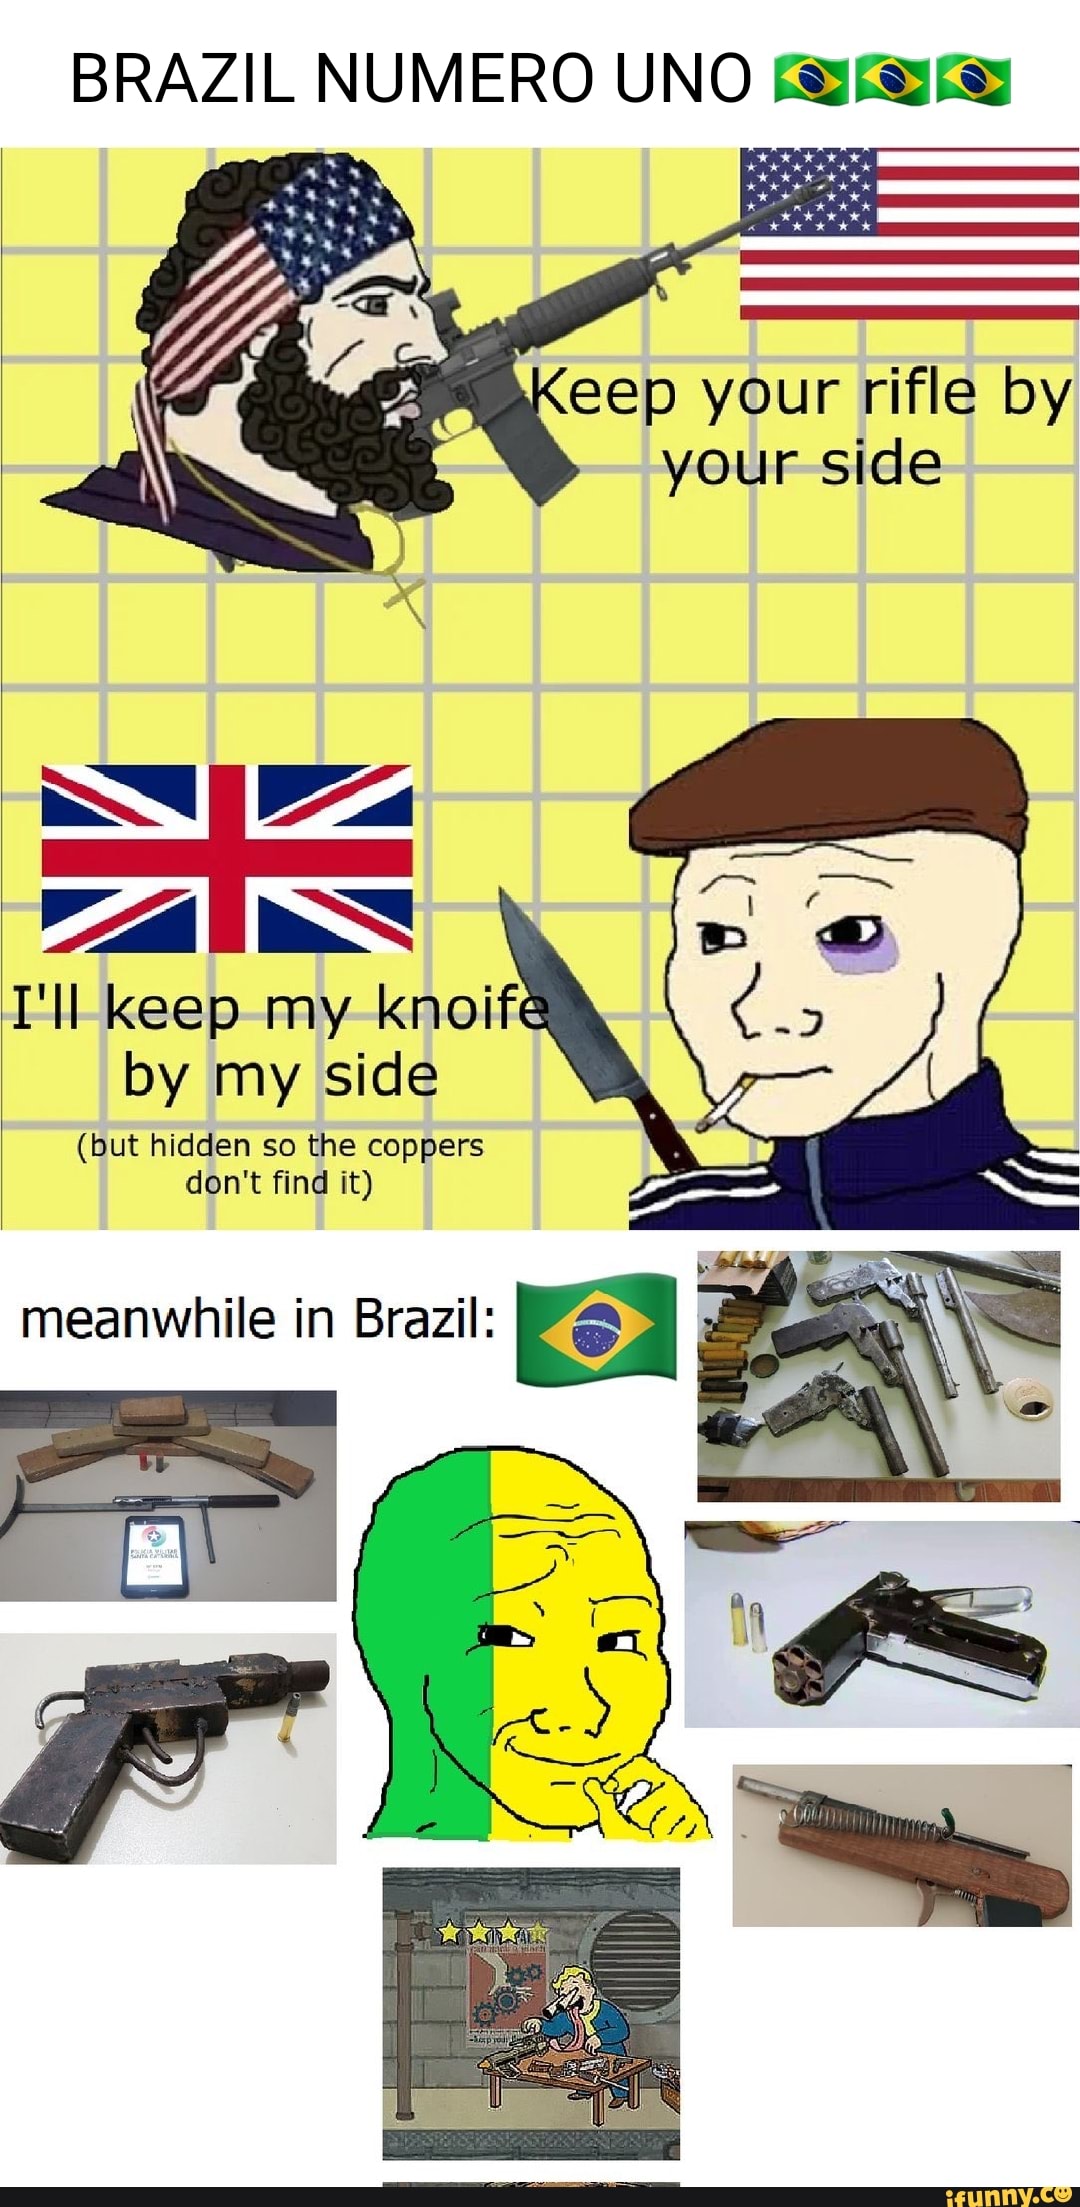 THERE NO MEME CLEAN YOUR GUNS - iFunny Brazil